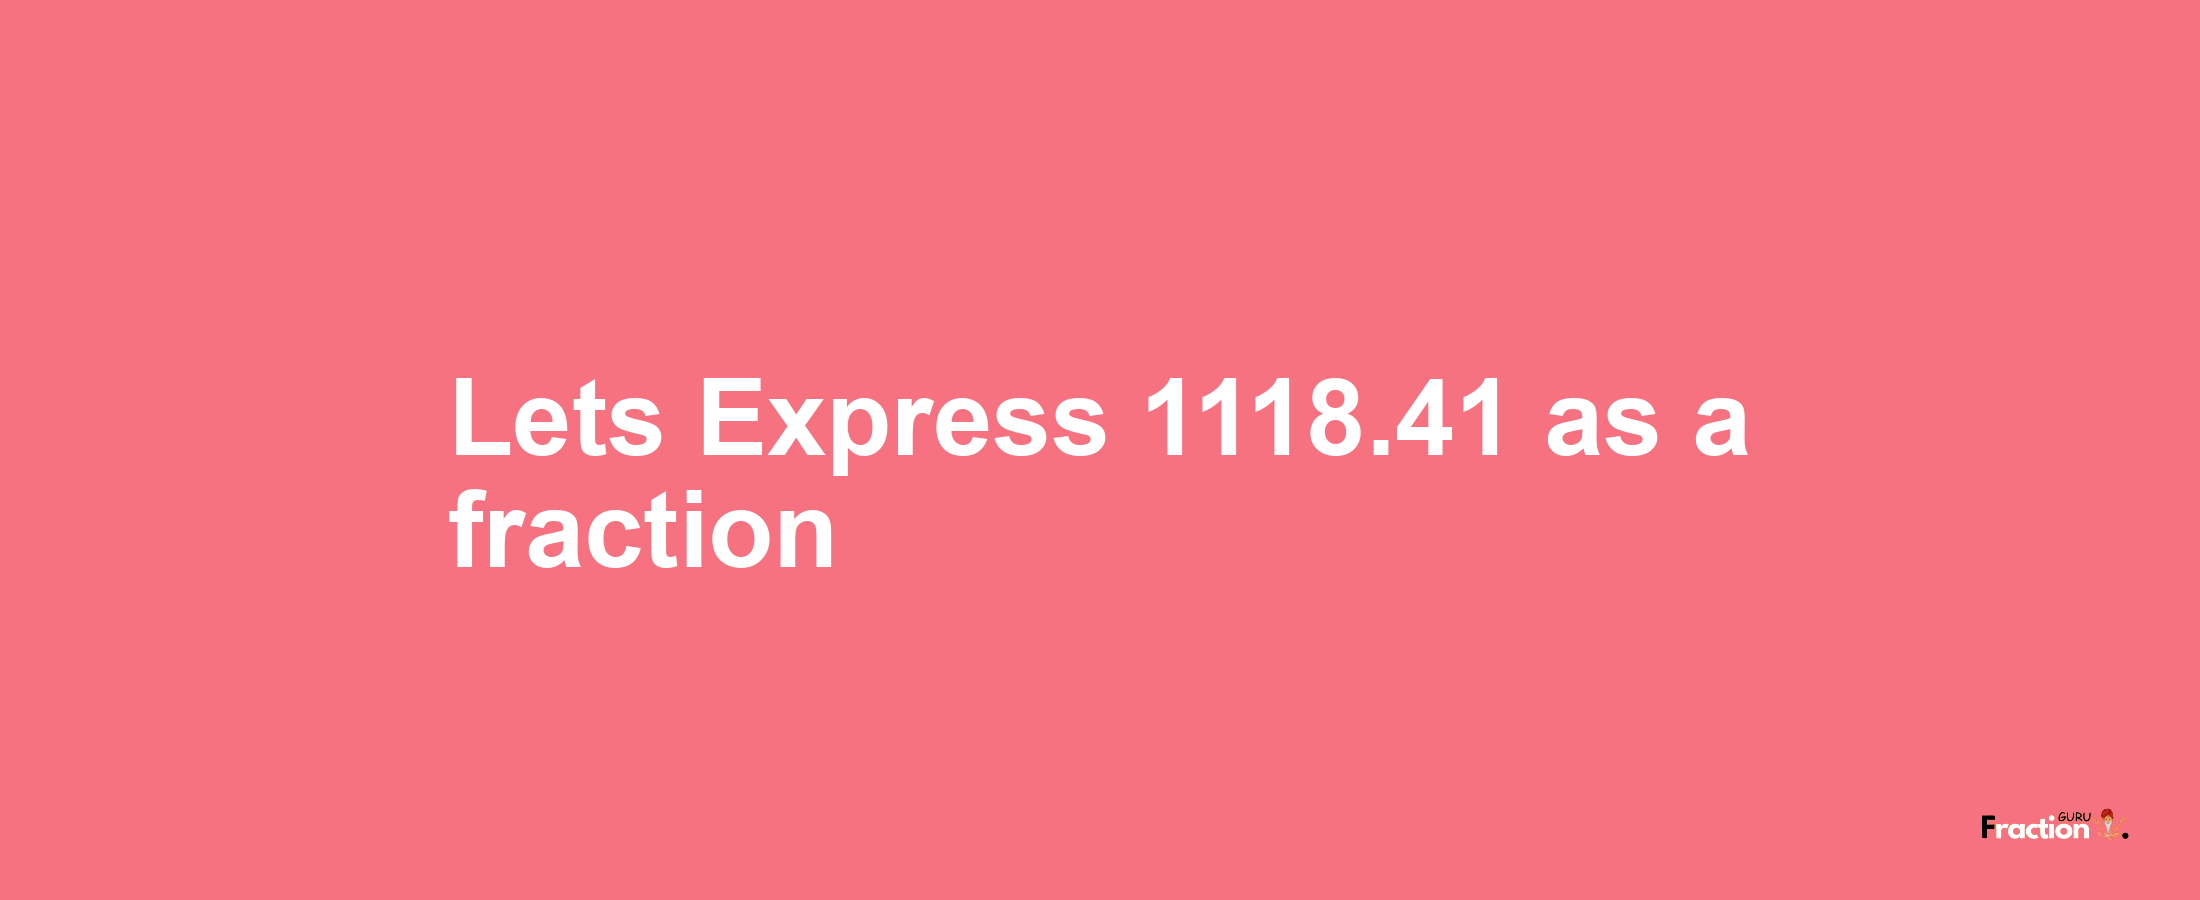 Lets Express 1118.41 as afraction